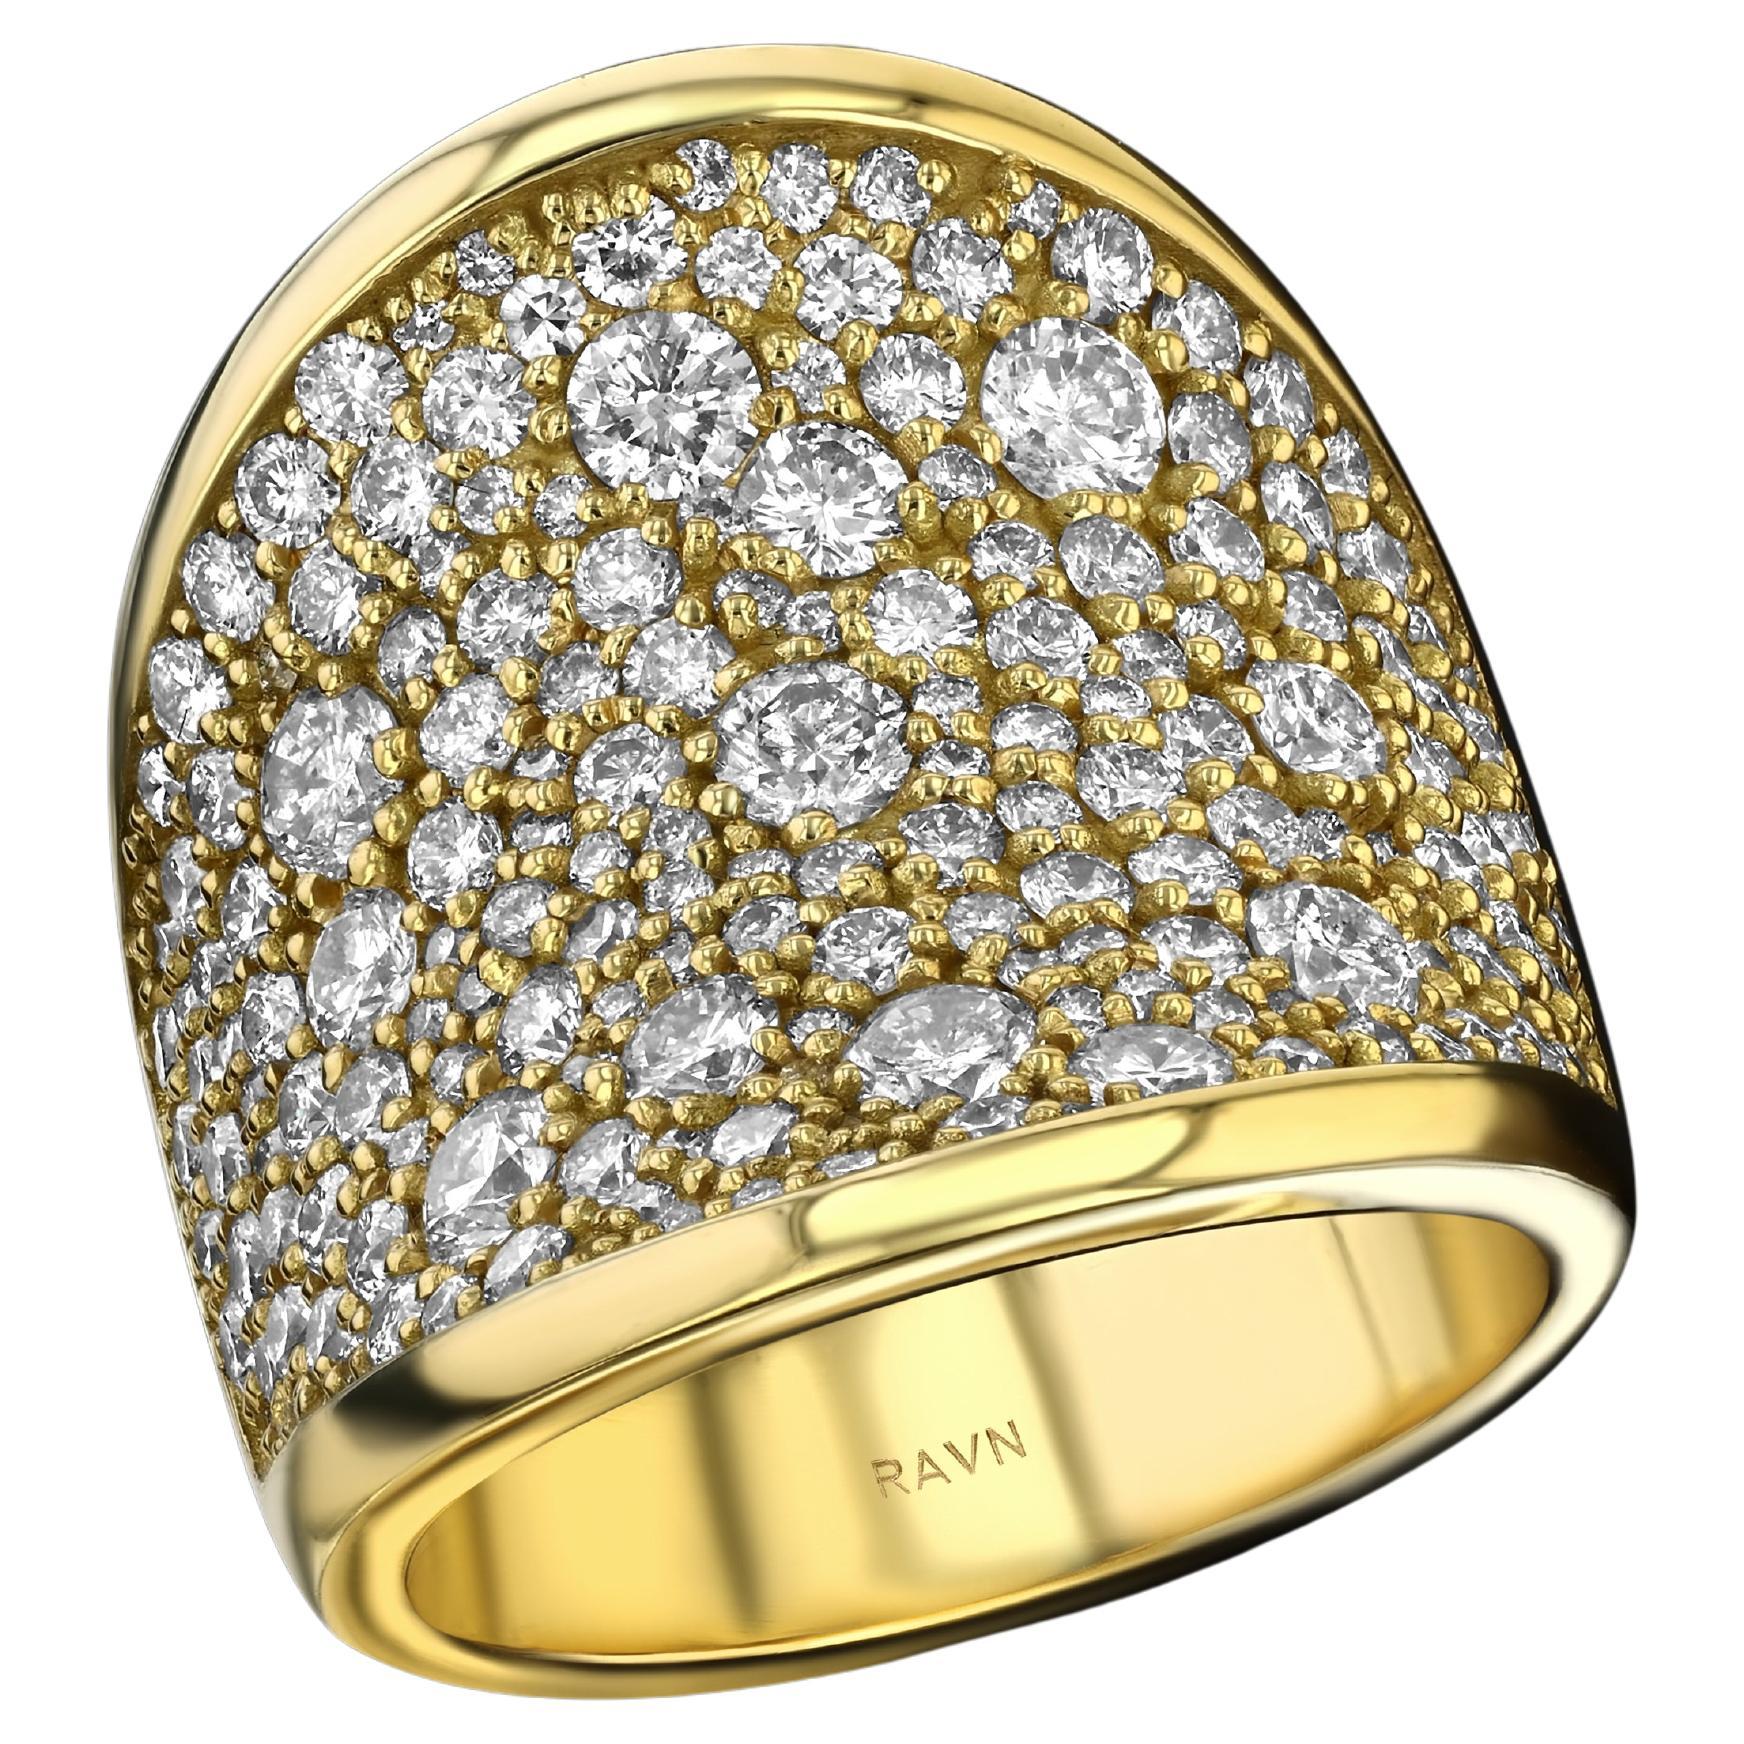 House of RAVN, 18k Gold Saddle Ring with 180 Diamonds (3.65ct total) For Sale